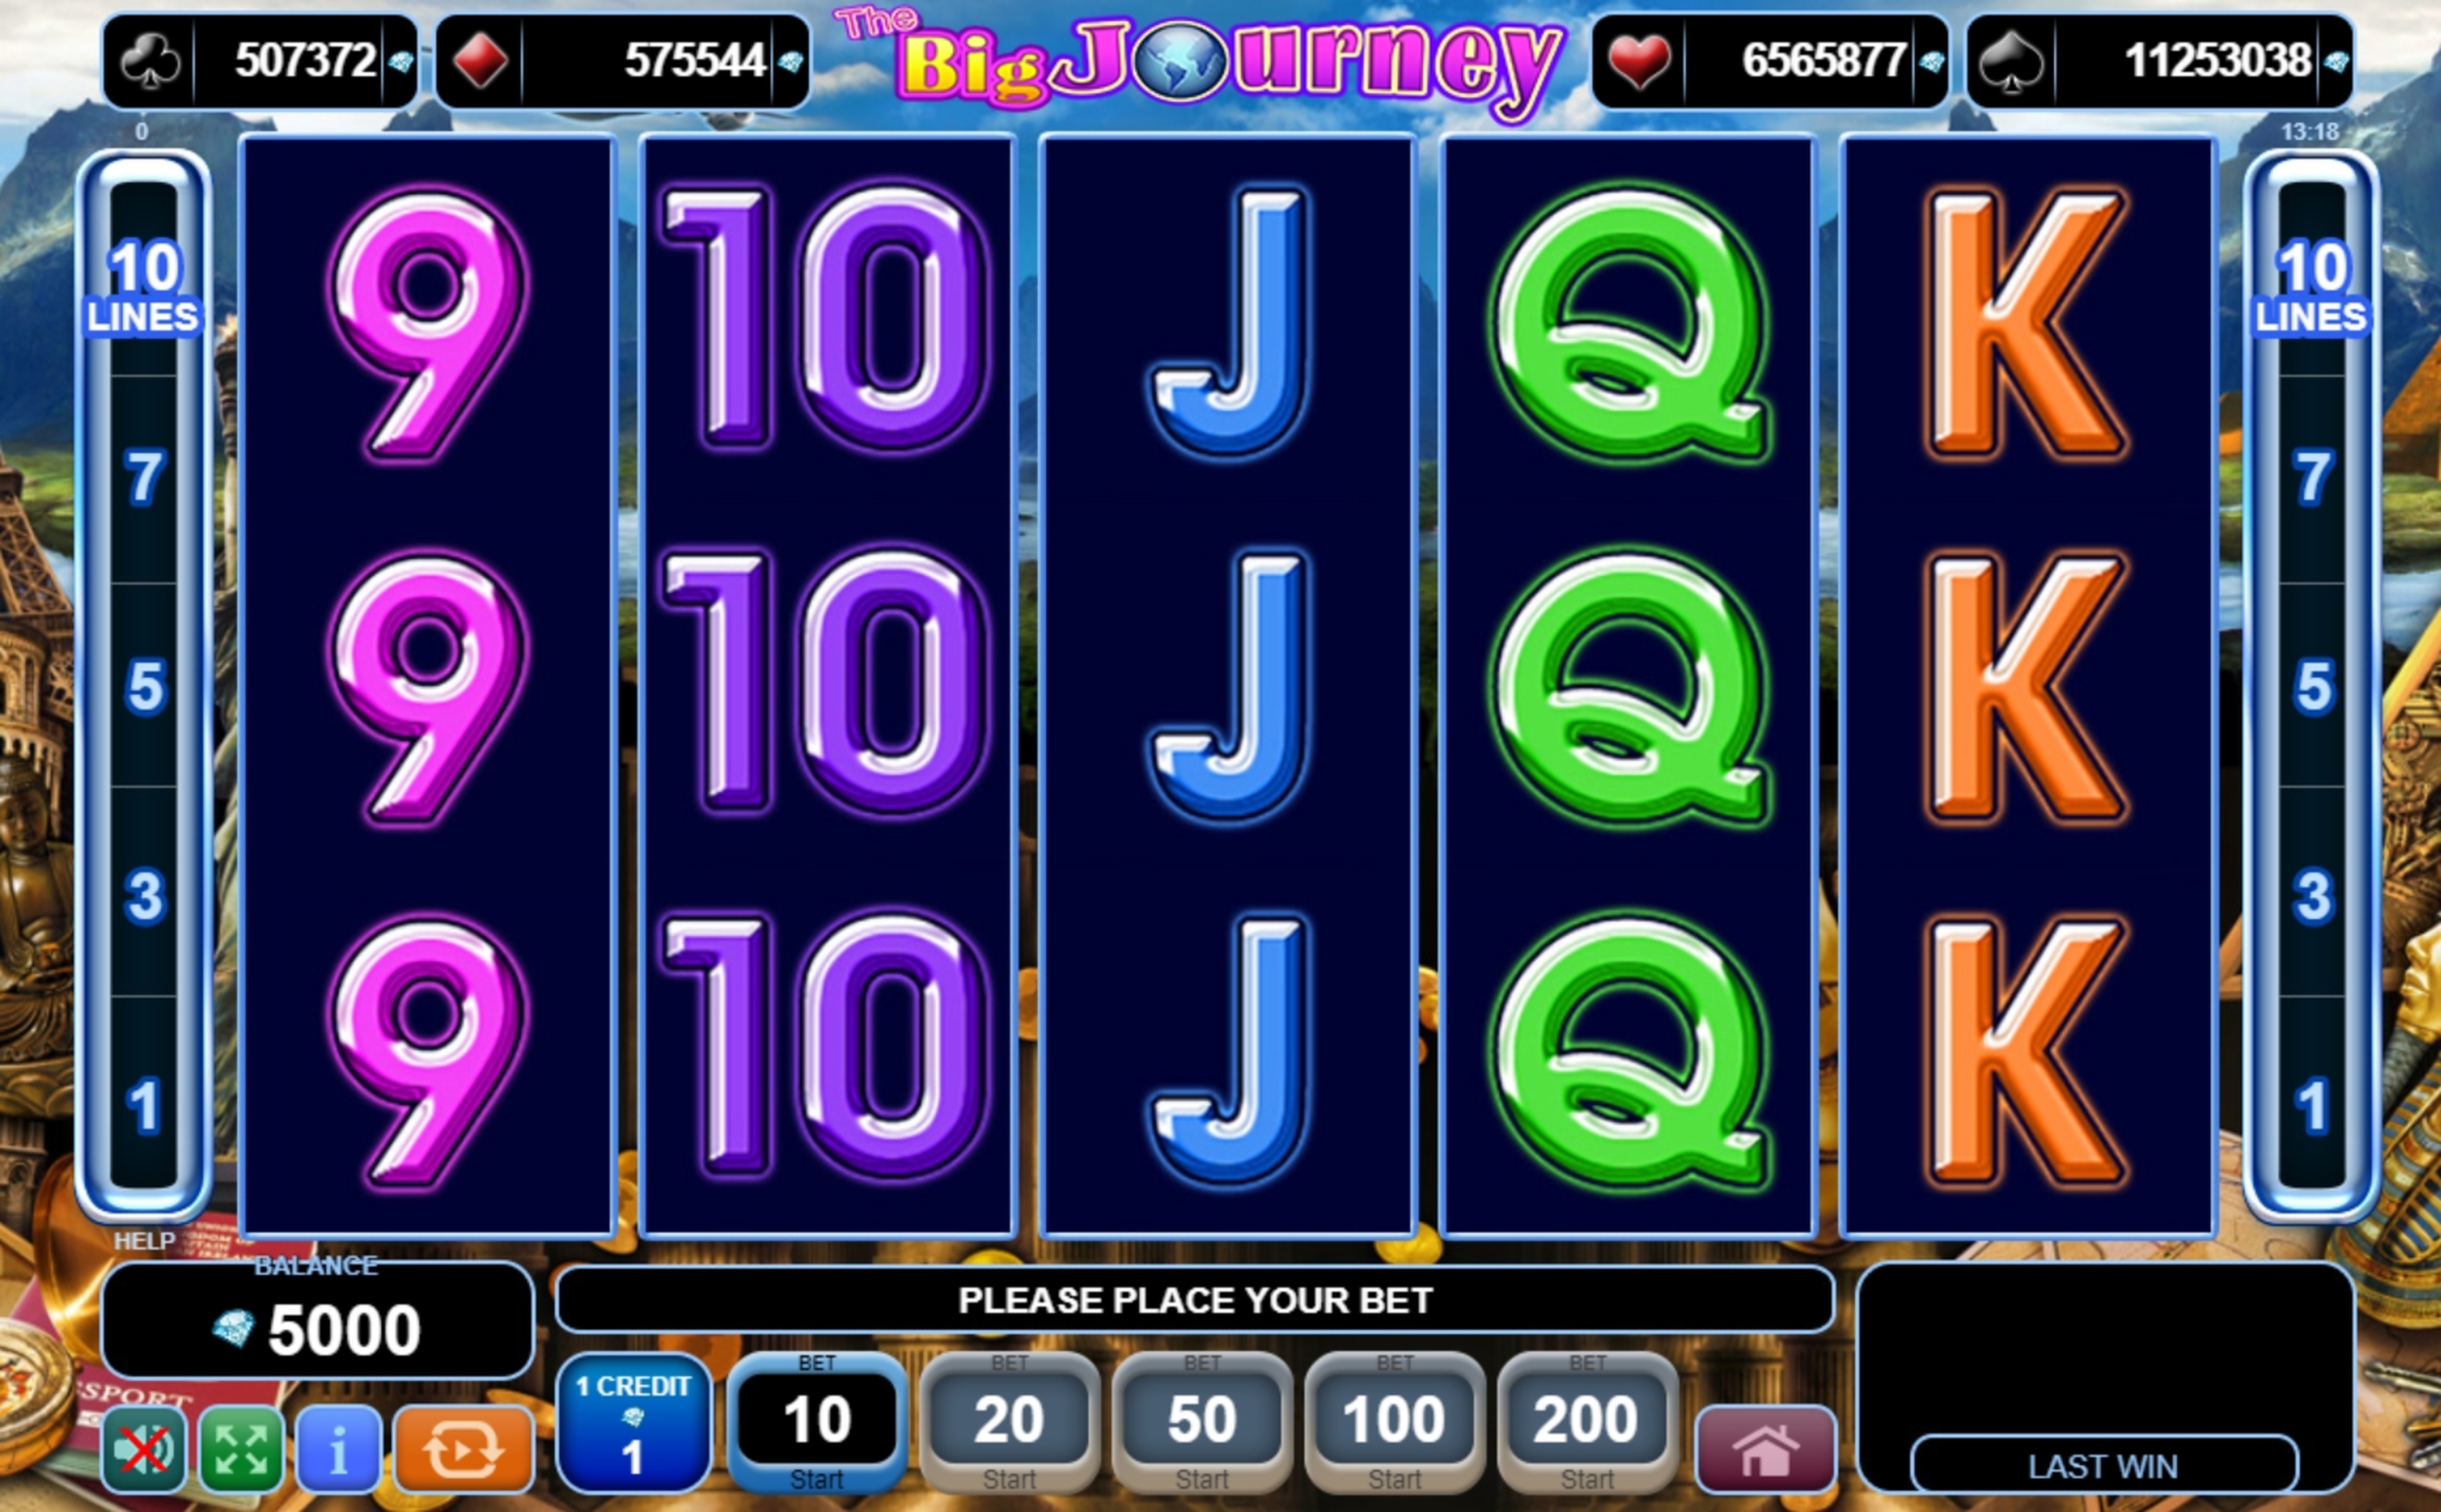 Reels in The Big Journey Slot Game by EGT